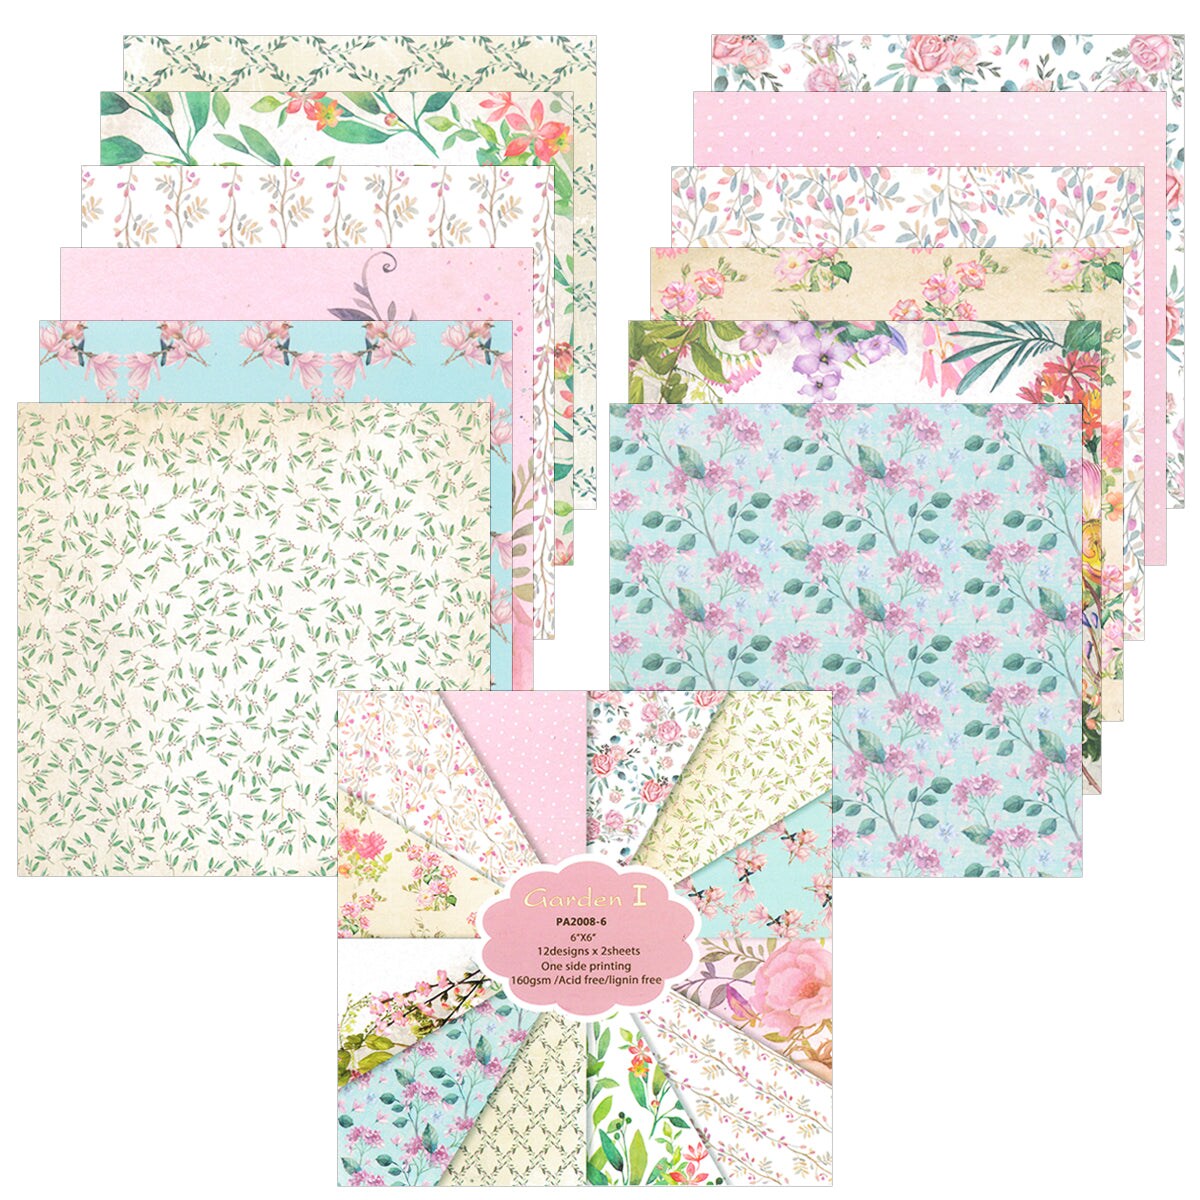 Craft Perfect Blue Blossom Patterned Paper Pack 6x6 Double Sided